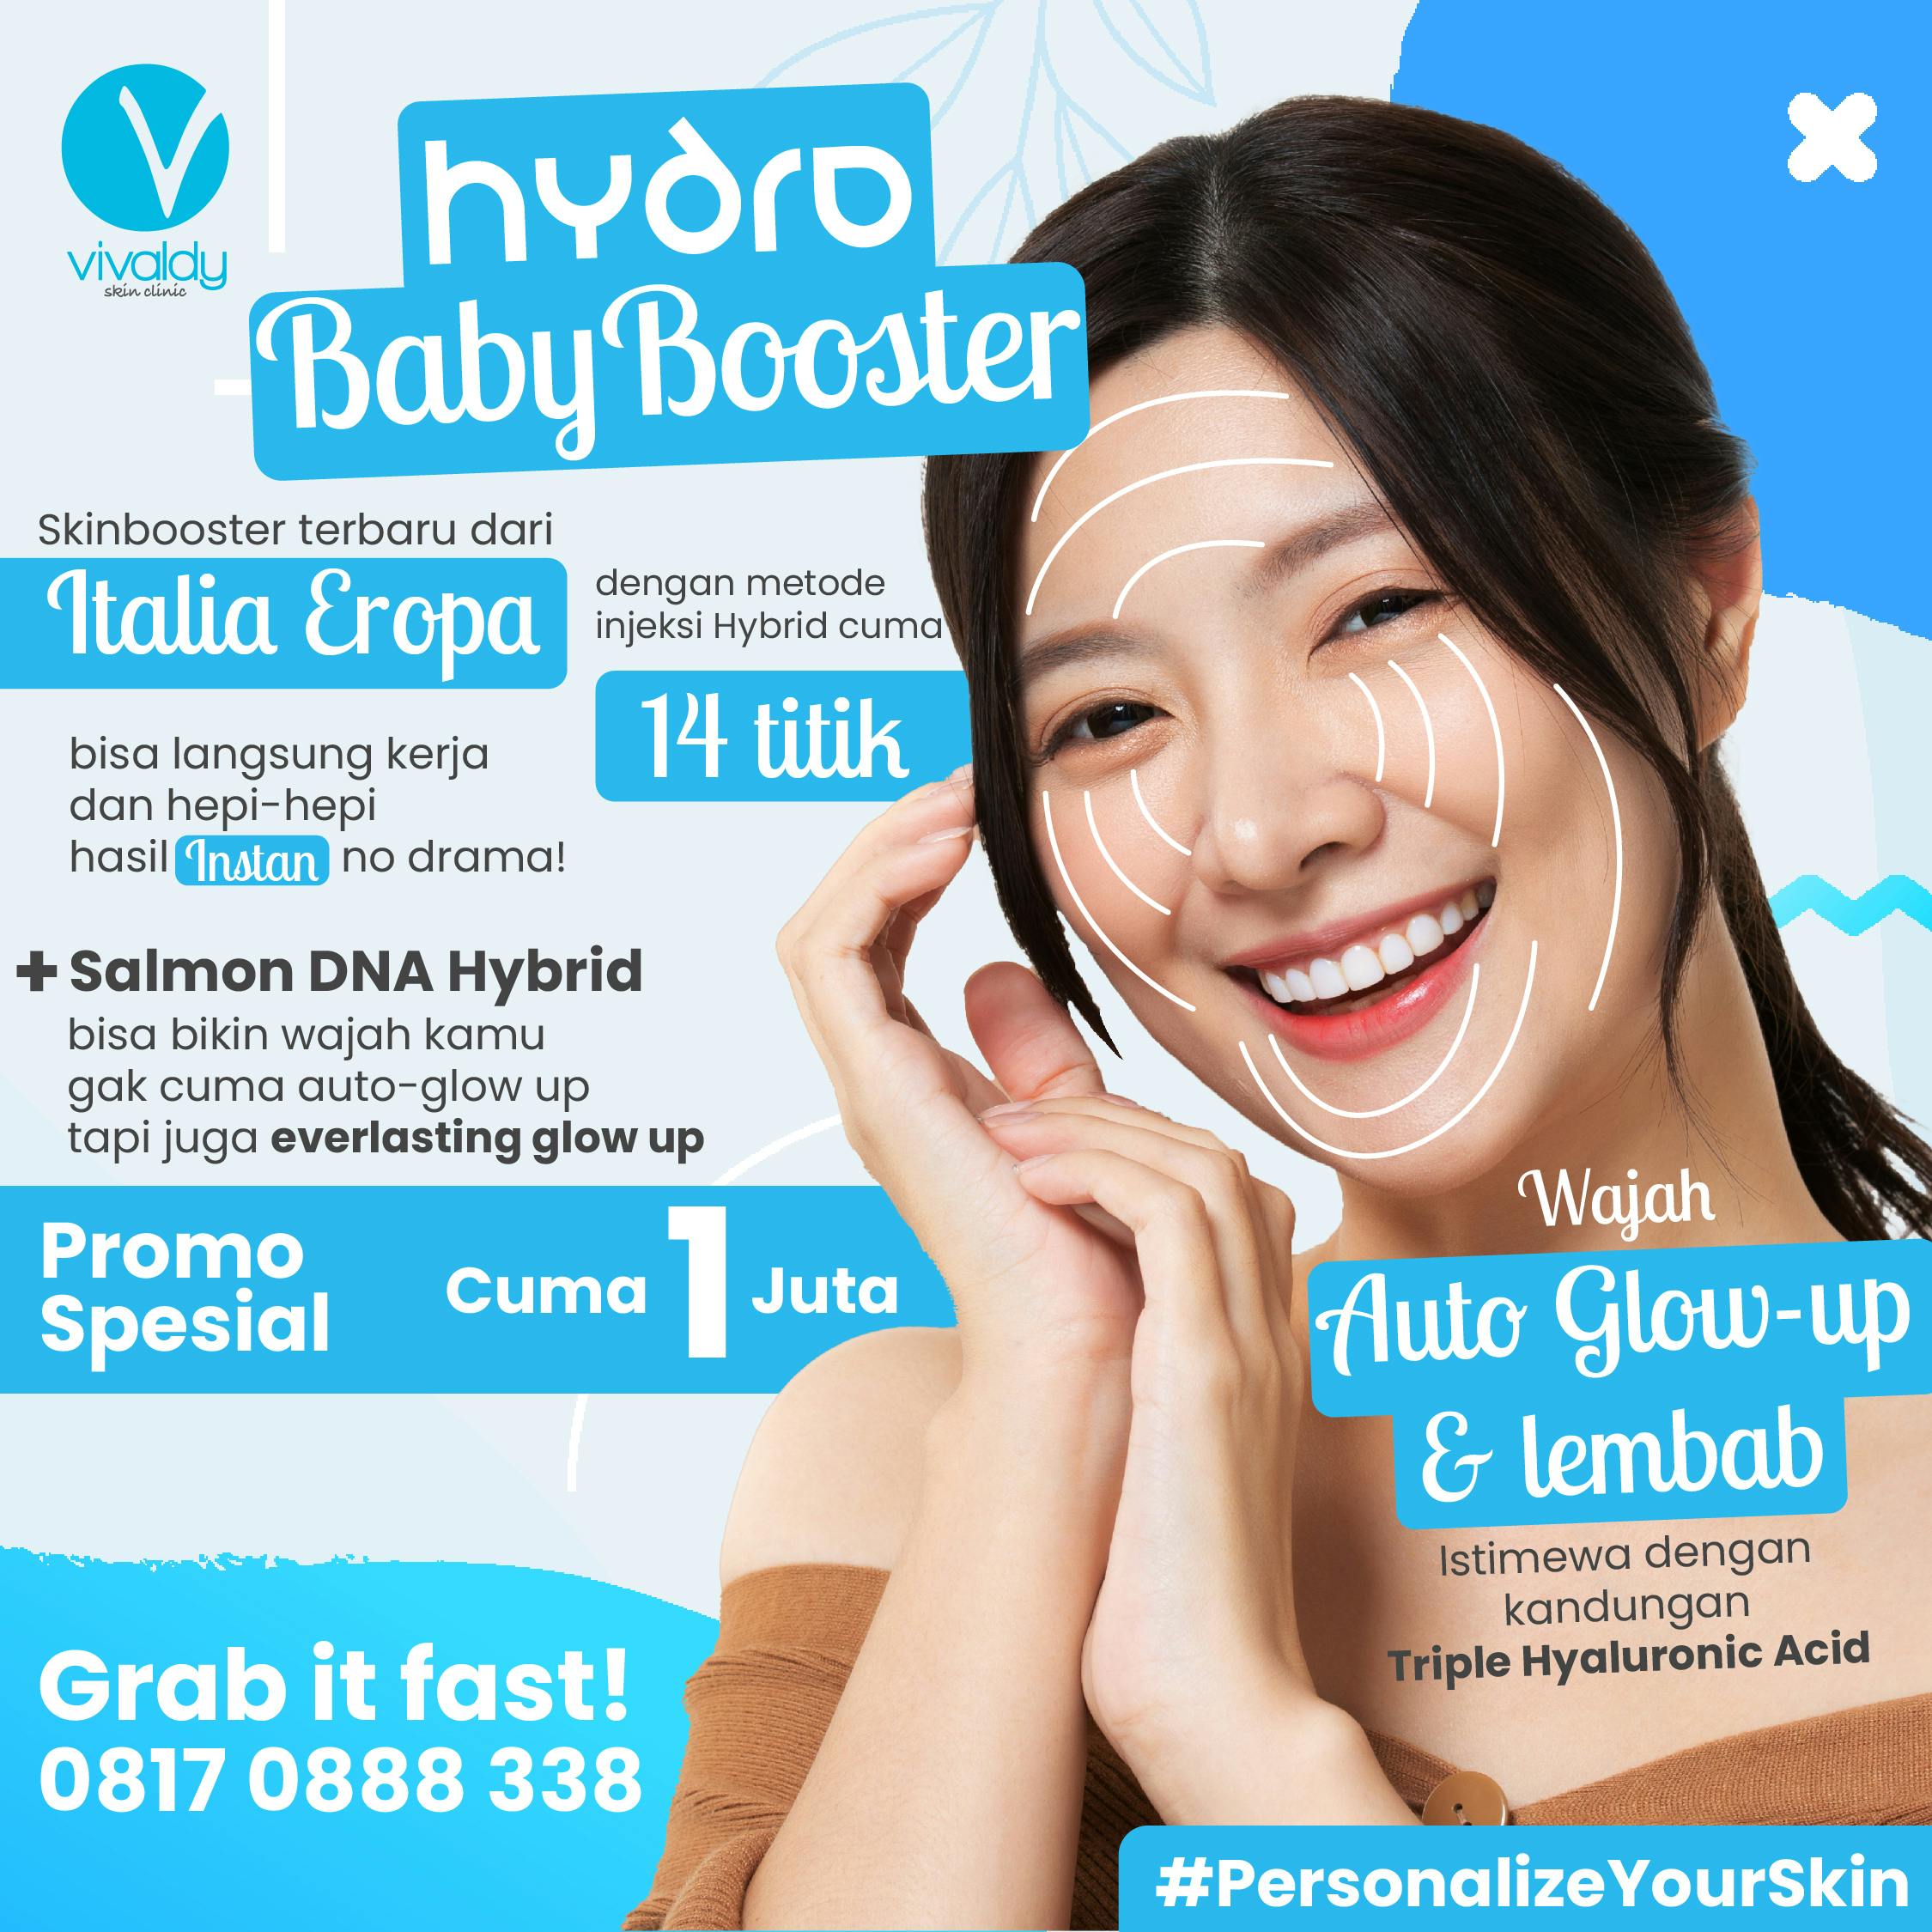 Hydro Baby Booster